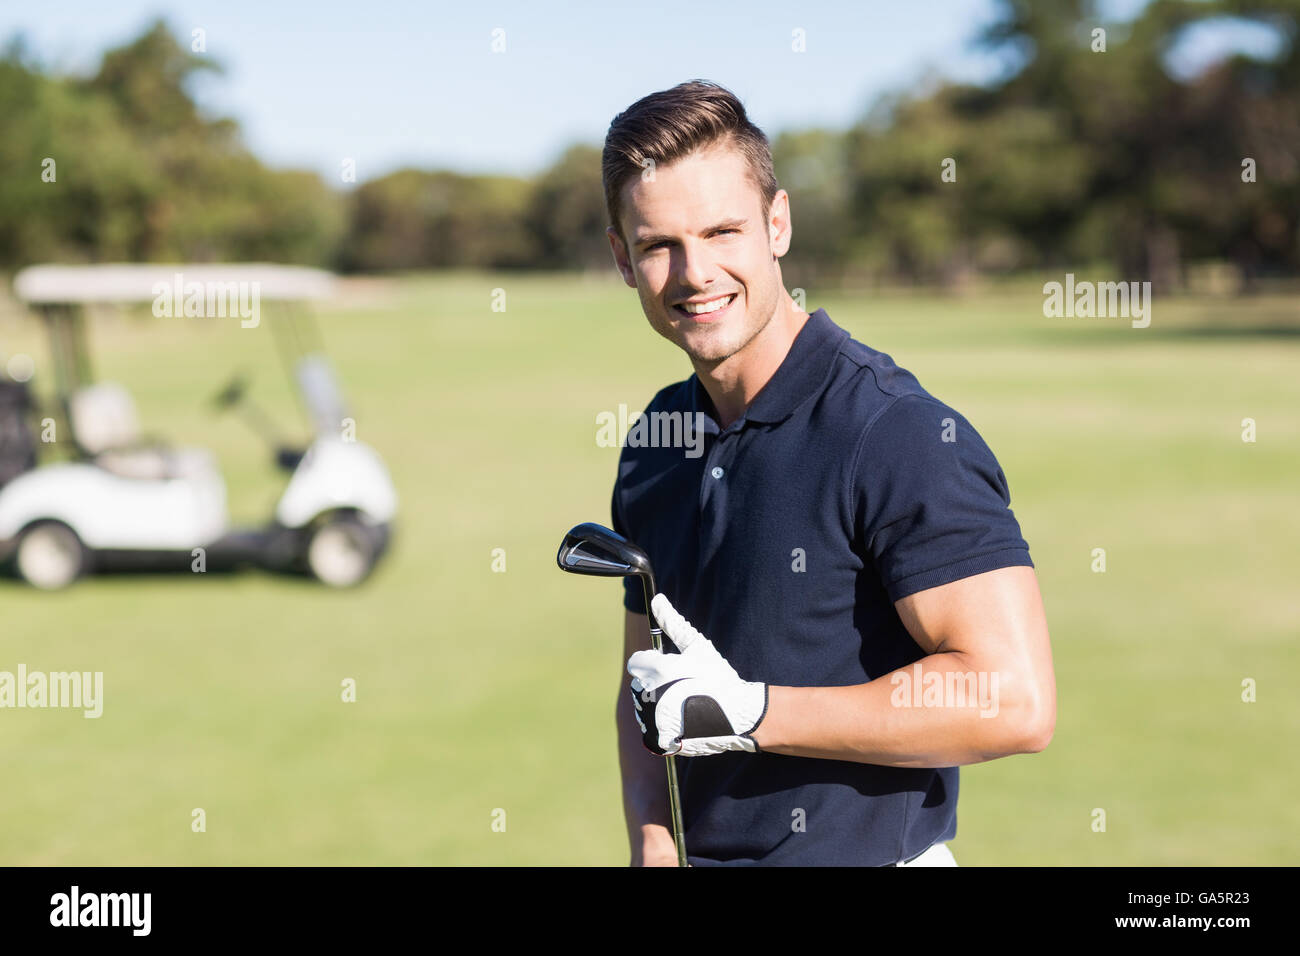 Portrait of young man holding golf club Banque D'Images